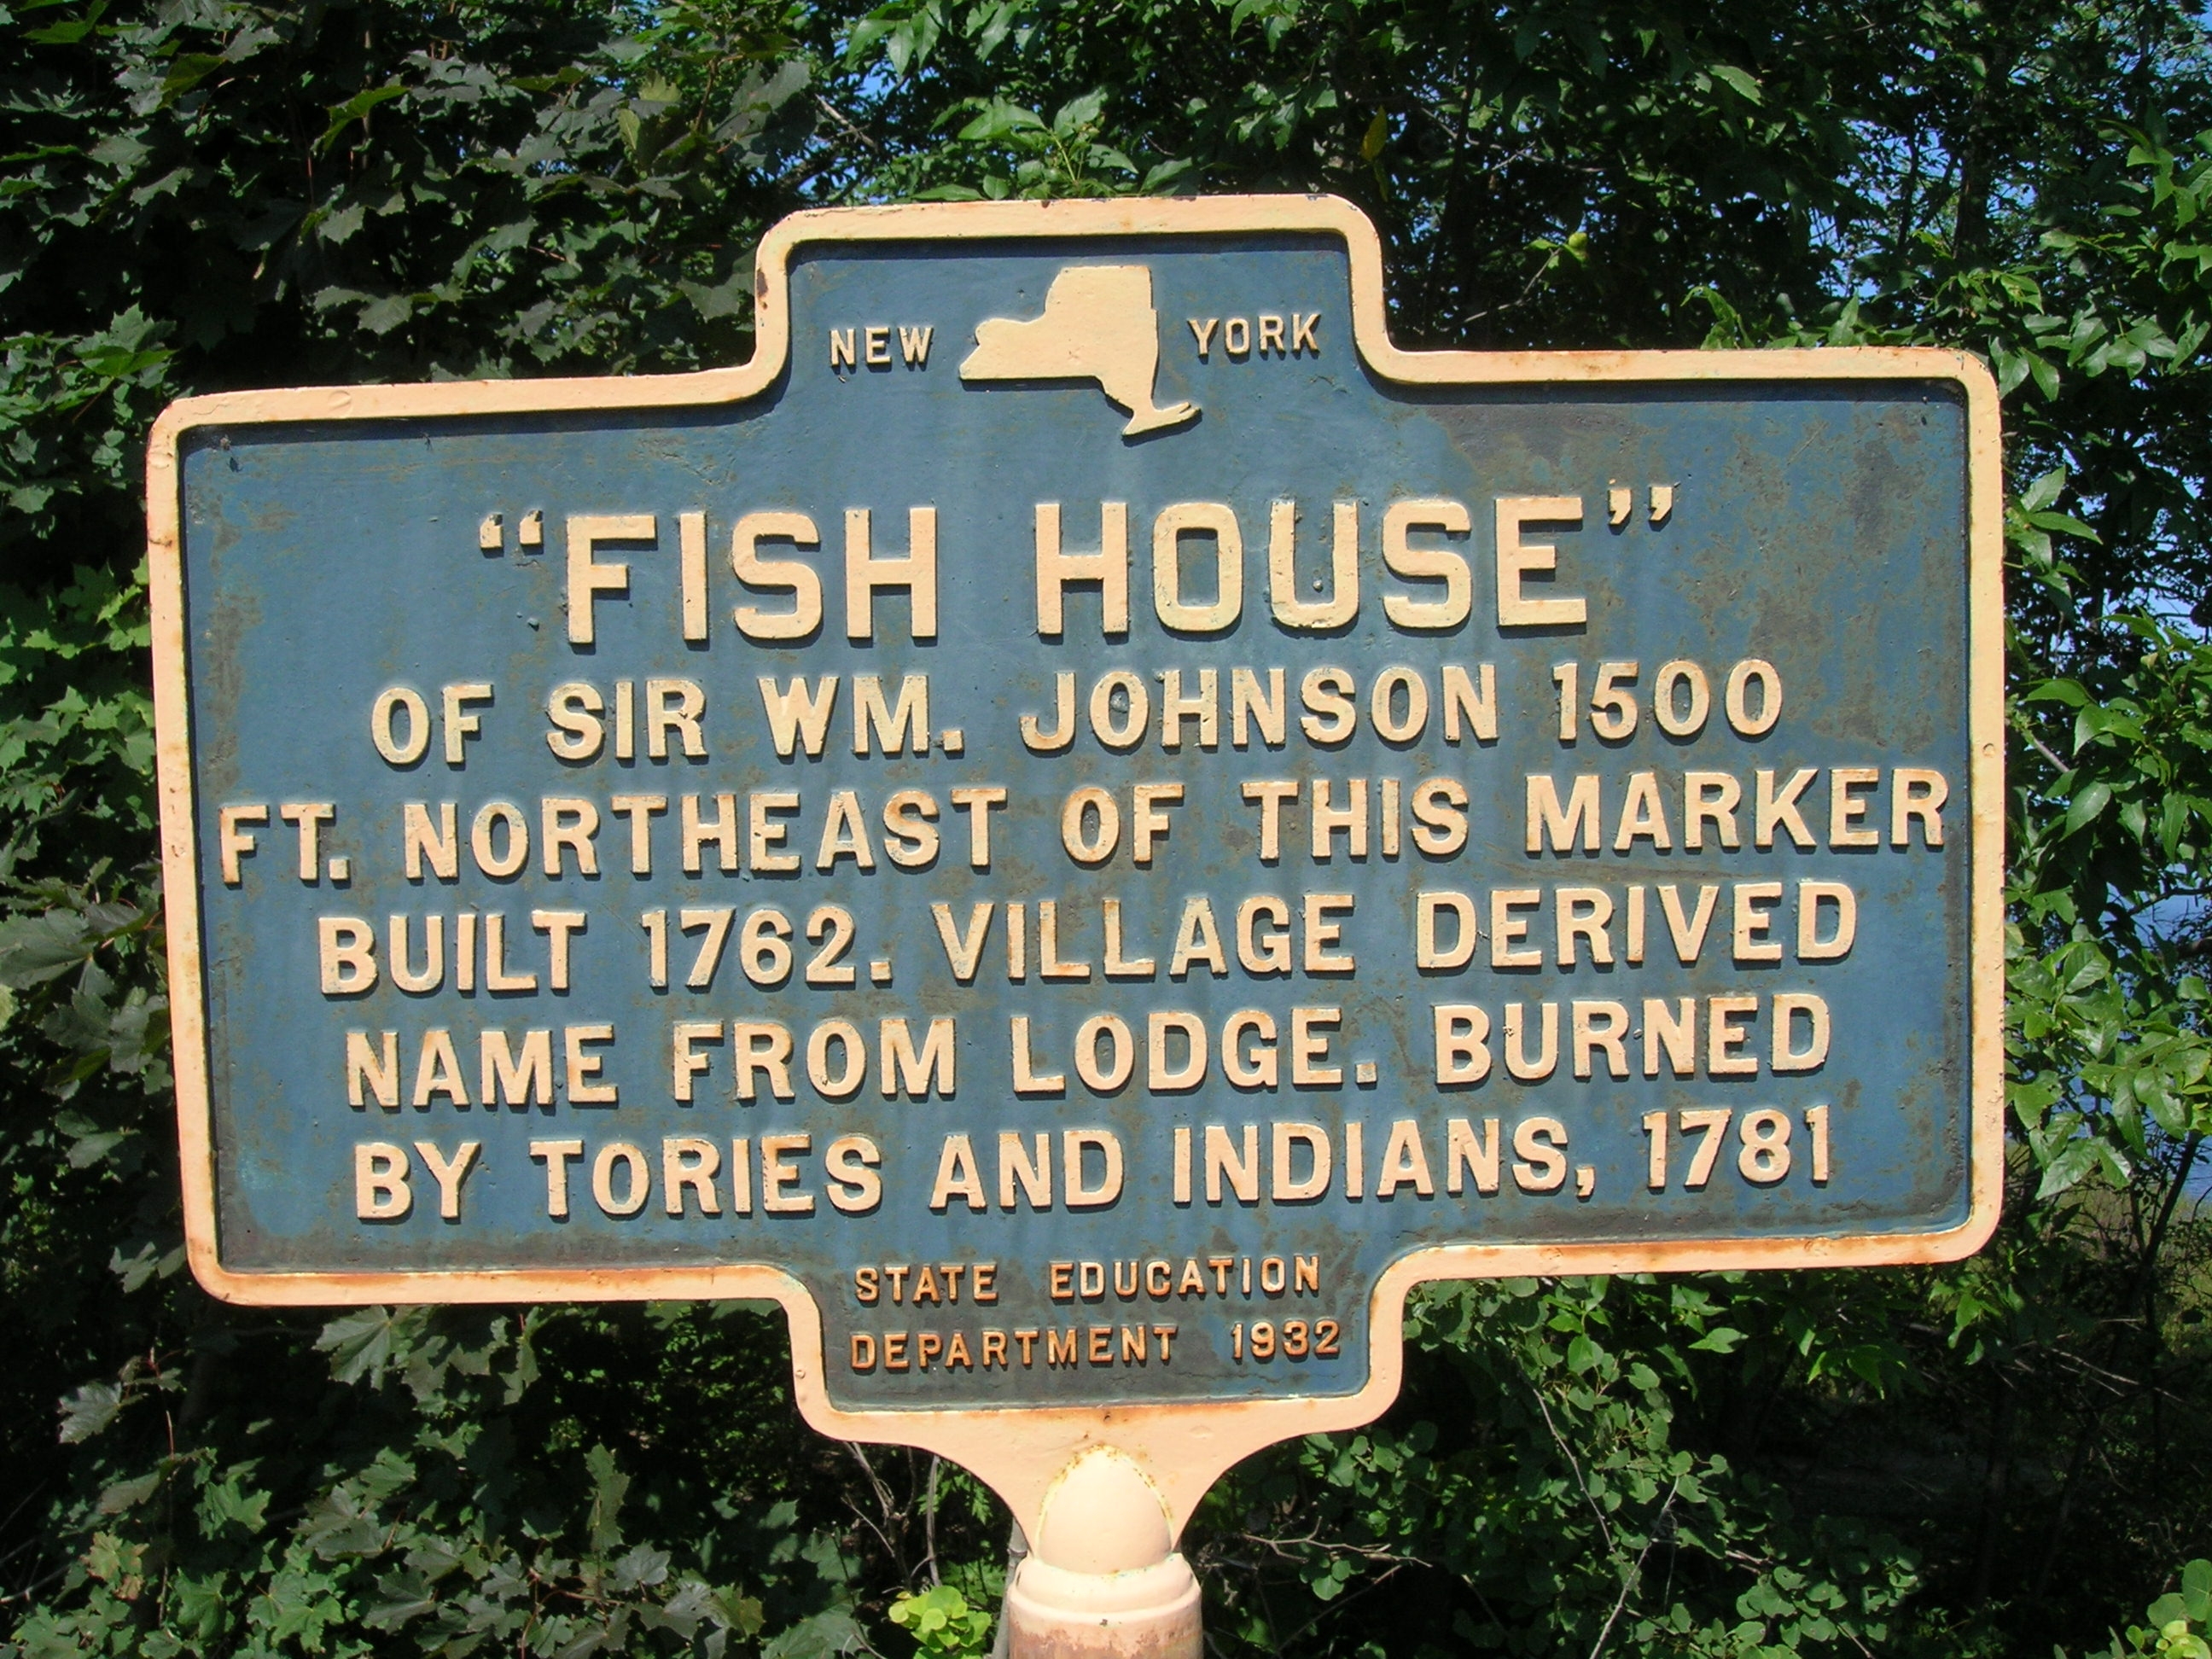 Fish House Marker, Prior to Repainting